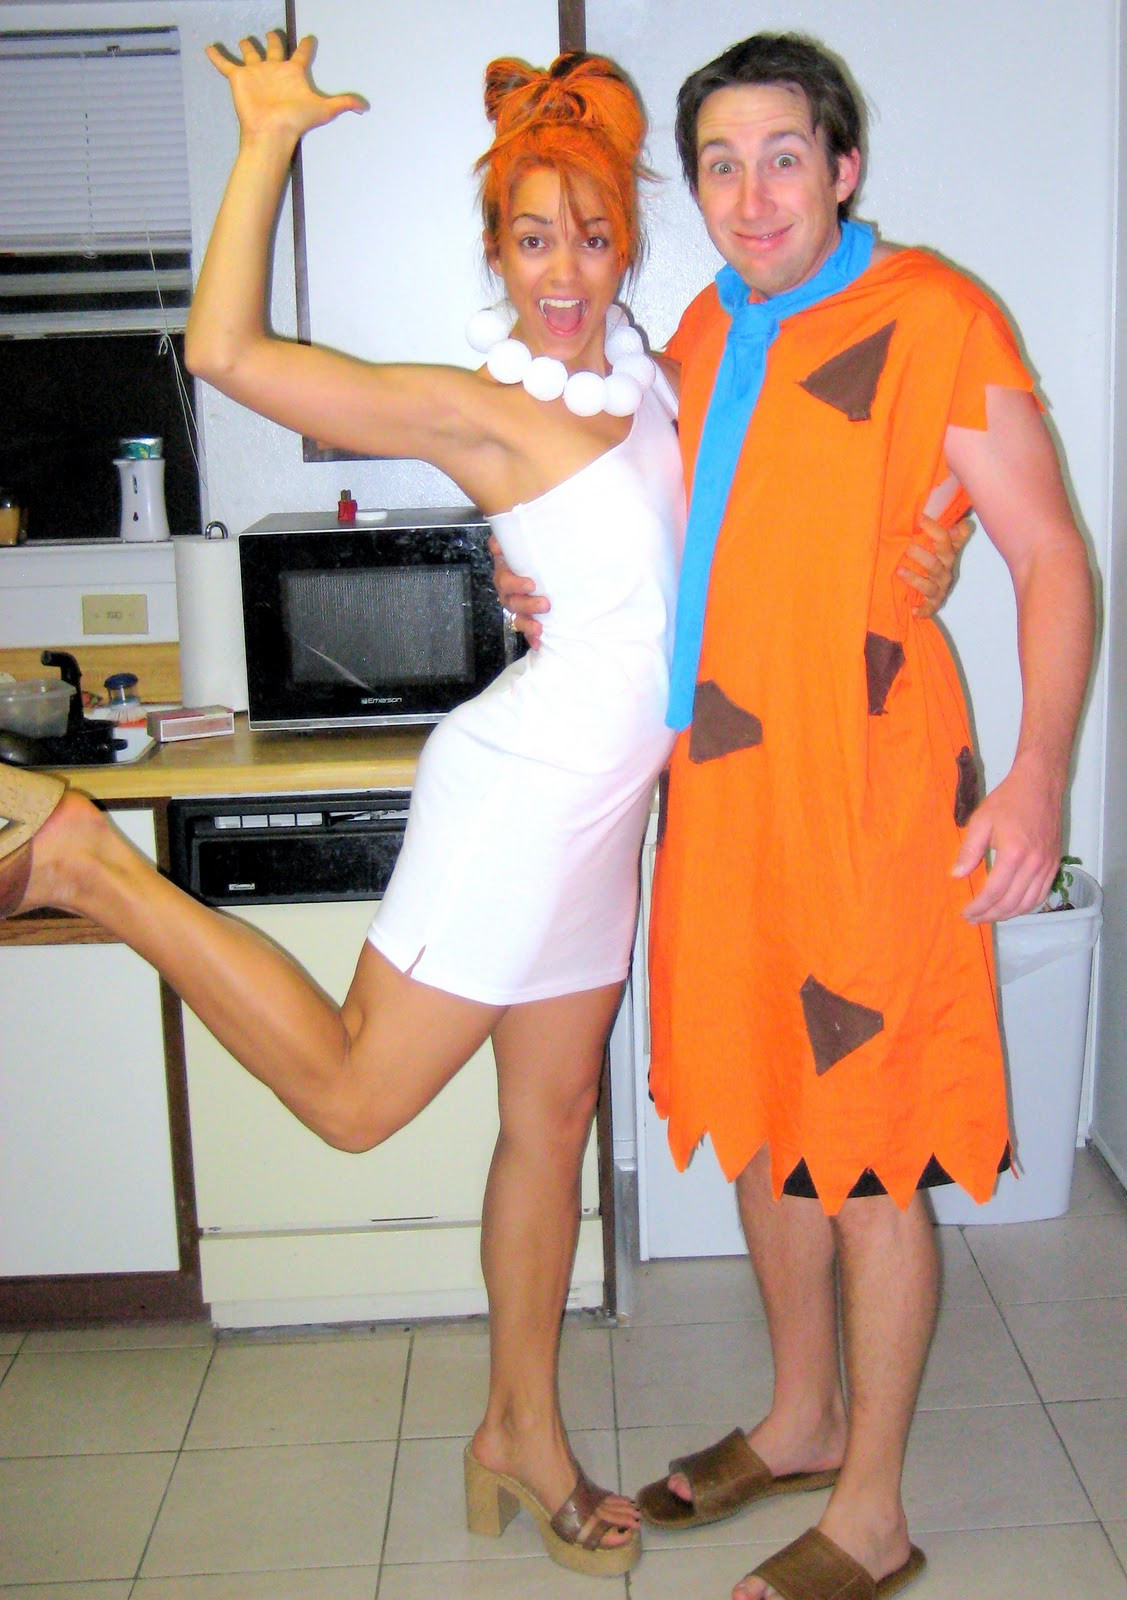 Adult DIY Halloween Costumes
 44 Homemade Halloween Costumes for Adults C R A F T